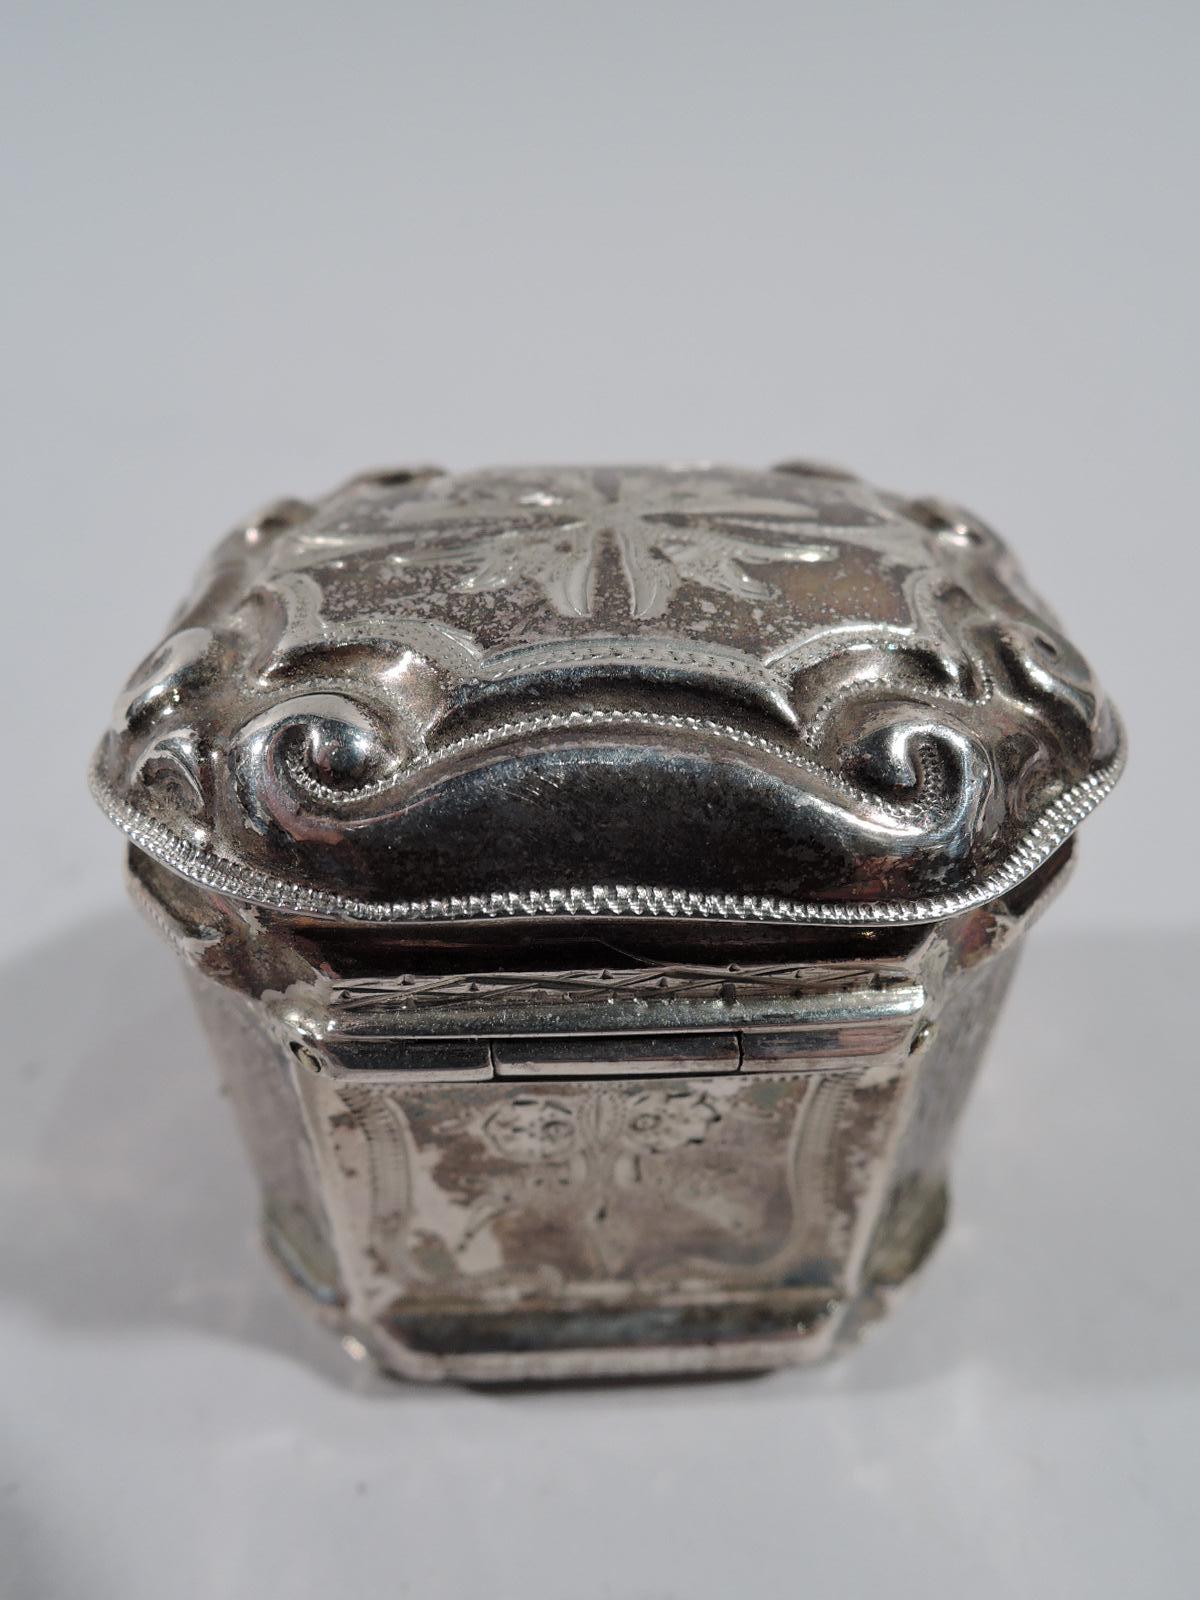 Dutch 833 silver peppermint box, 1879. Rectangular with chamfered corners, and hinged and domed cover. Engraved leaves and flowers alternating with diaper. Cover top has flower bordered by chased scrollwork. Marks include date letter and Minerva